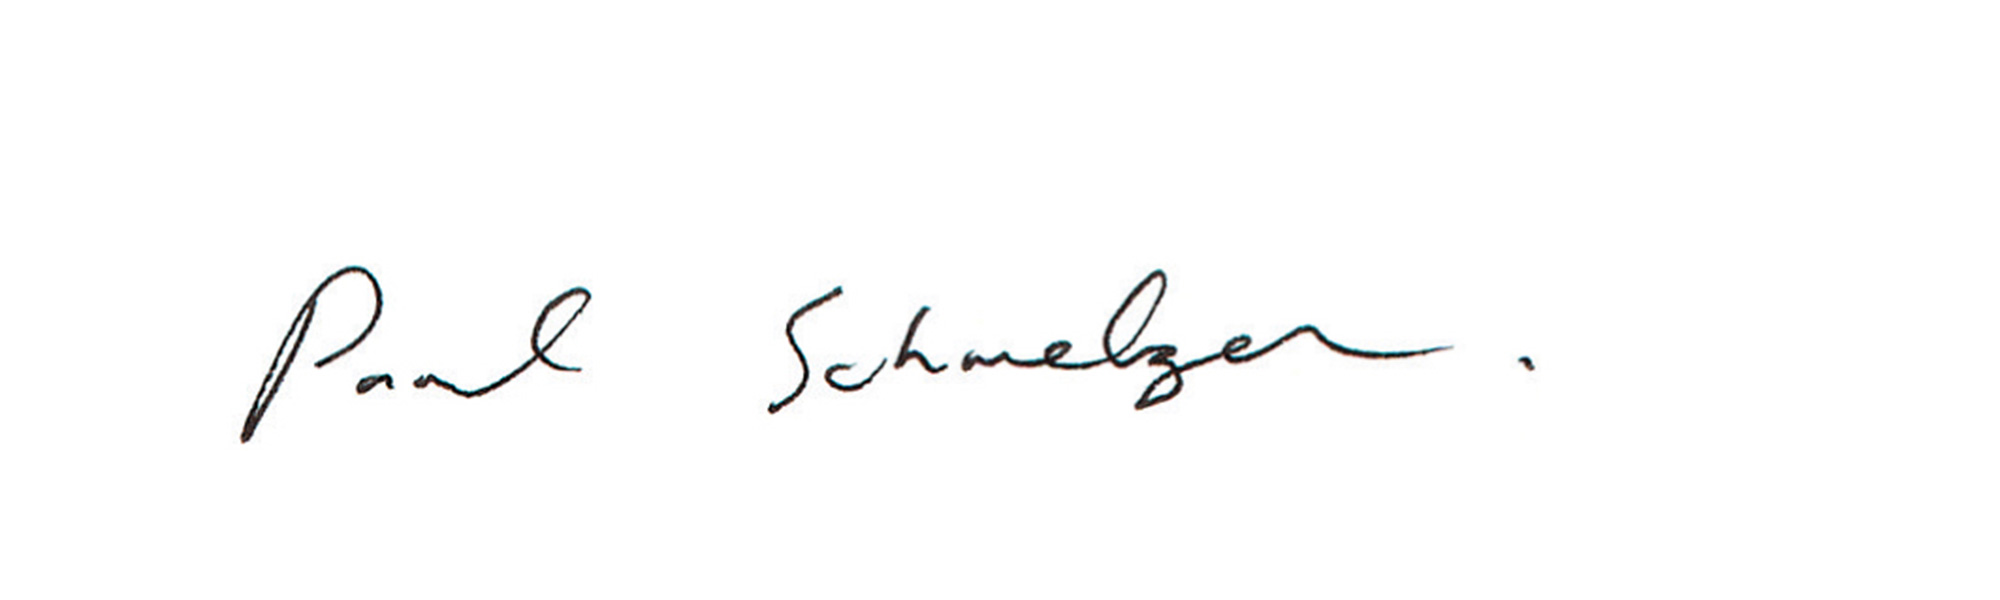 A photograph of Maya Lin's written version of the name Paul Schmelzer.